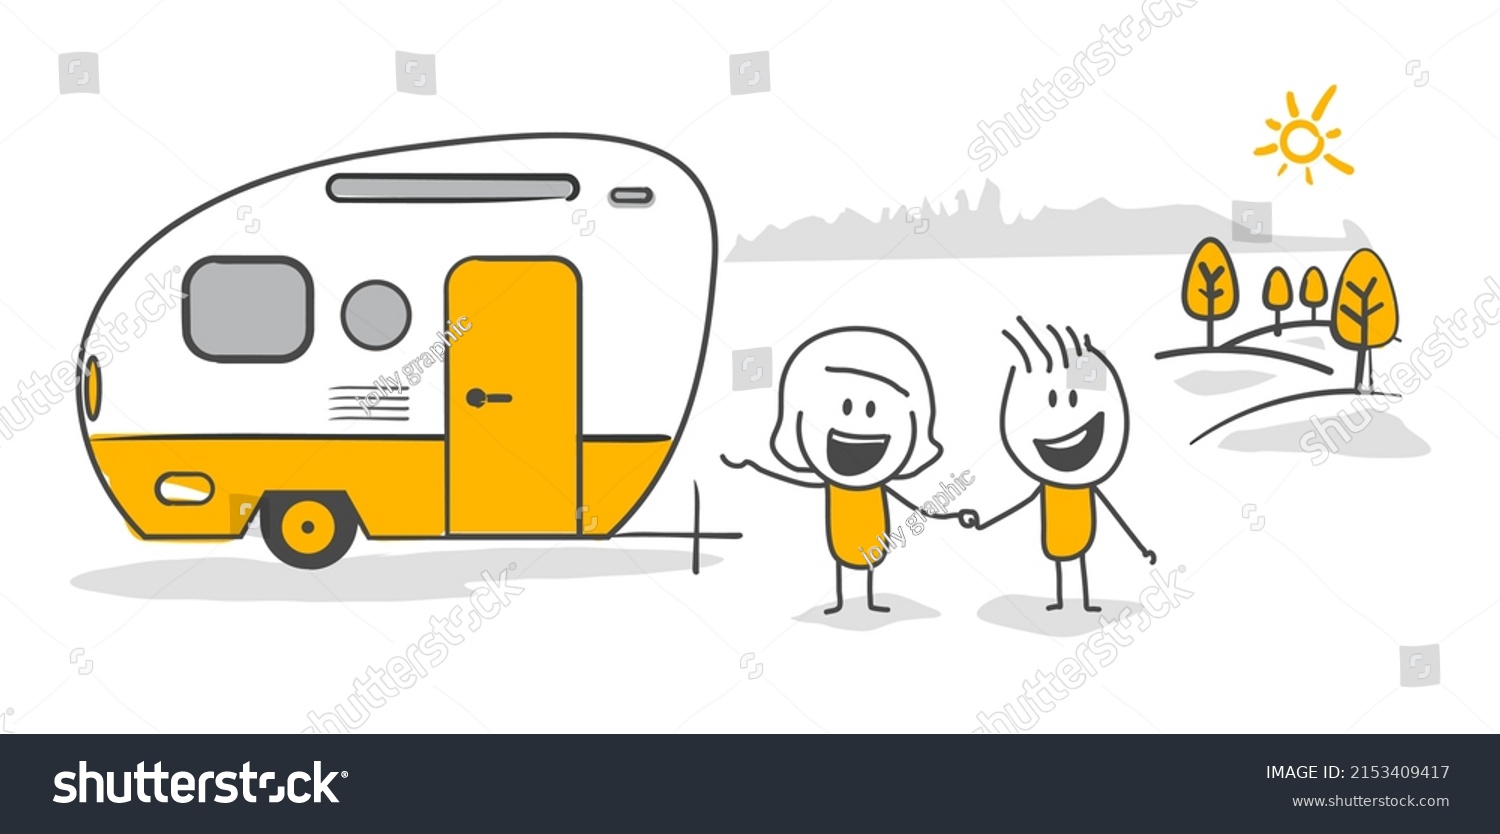 Stick figures. Mobile home for country and nature vacation. Road home Trailer. Recreational vehicle. Camping caravan car. Holiday trip concept.  #2153409417